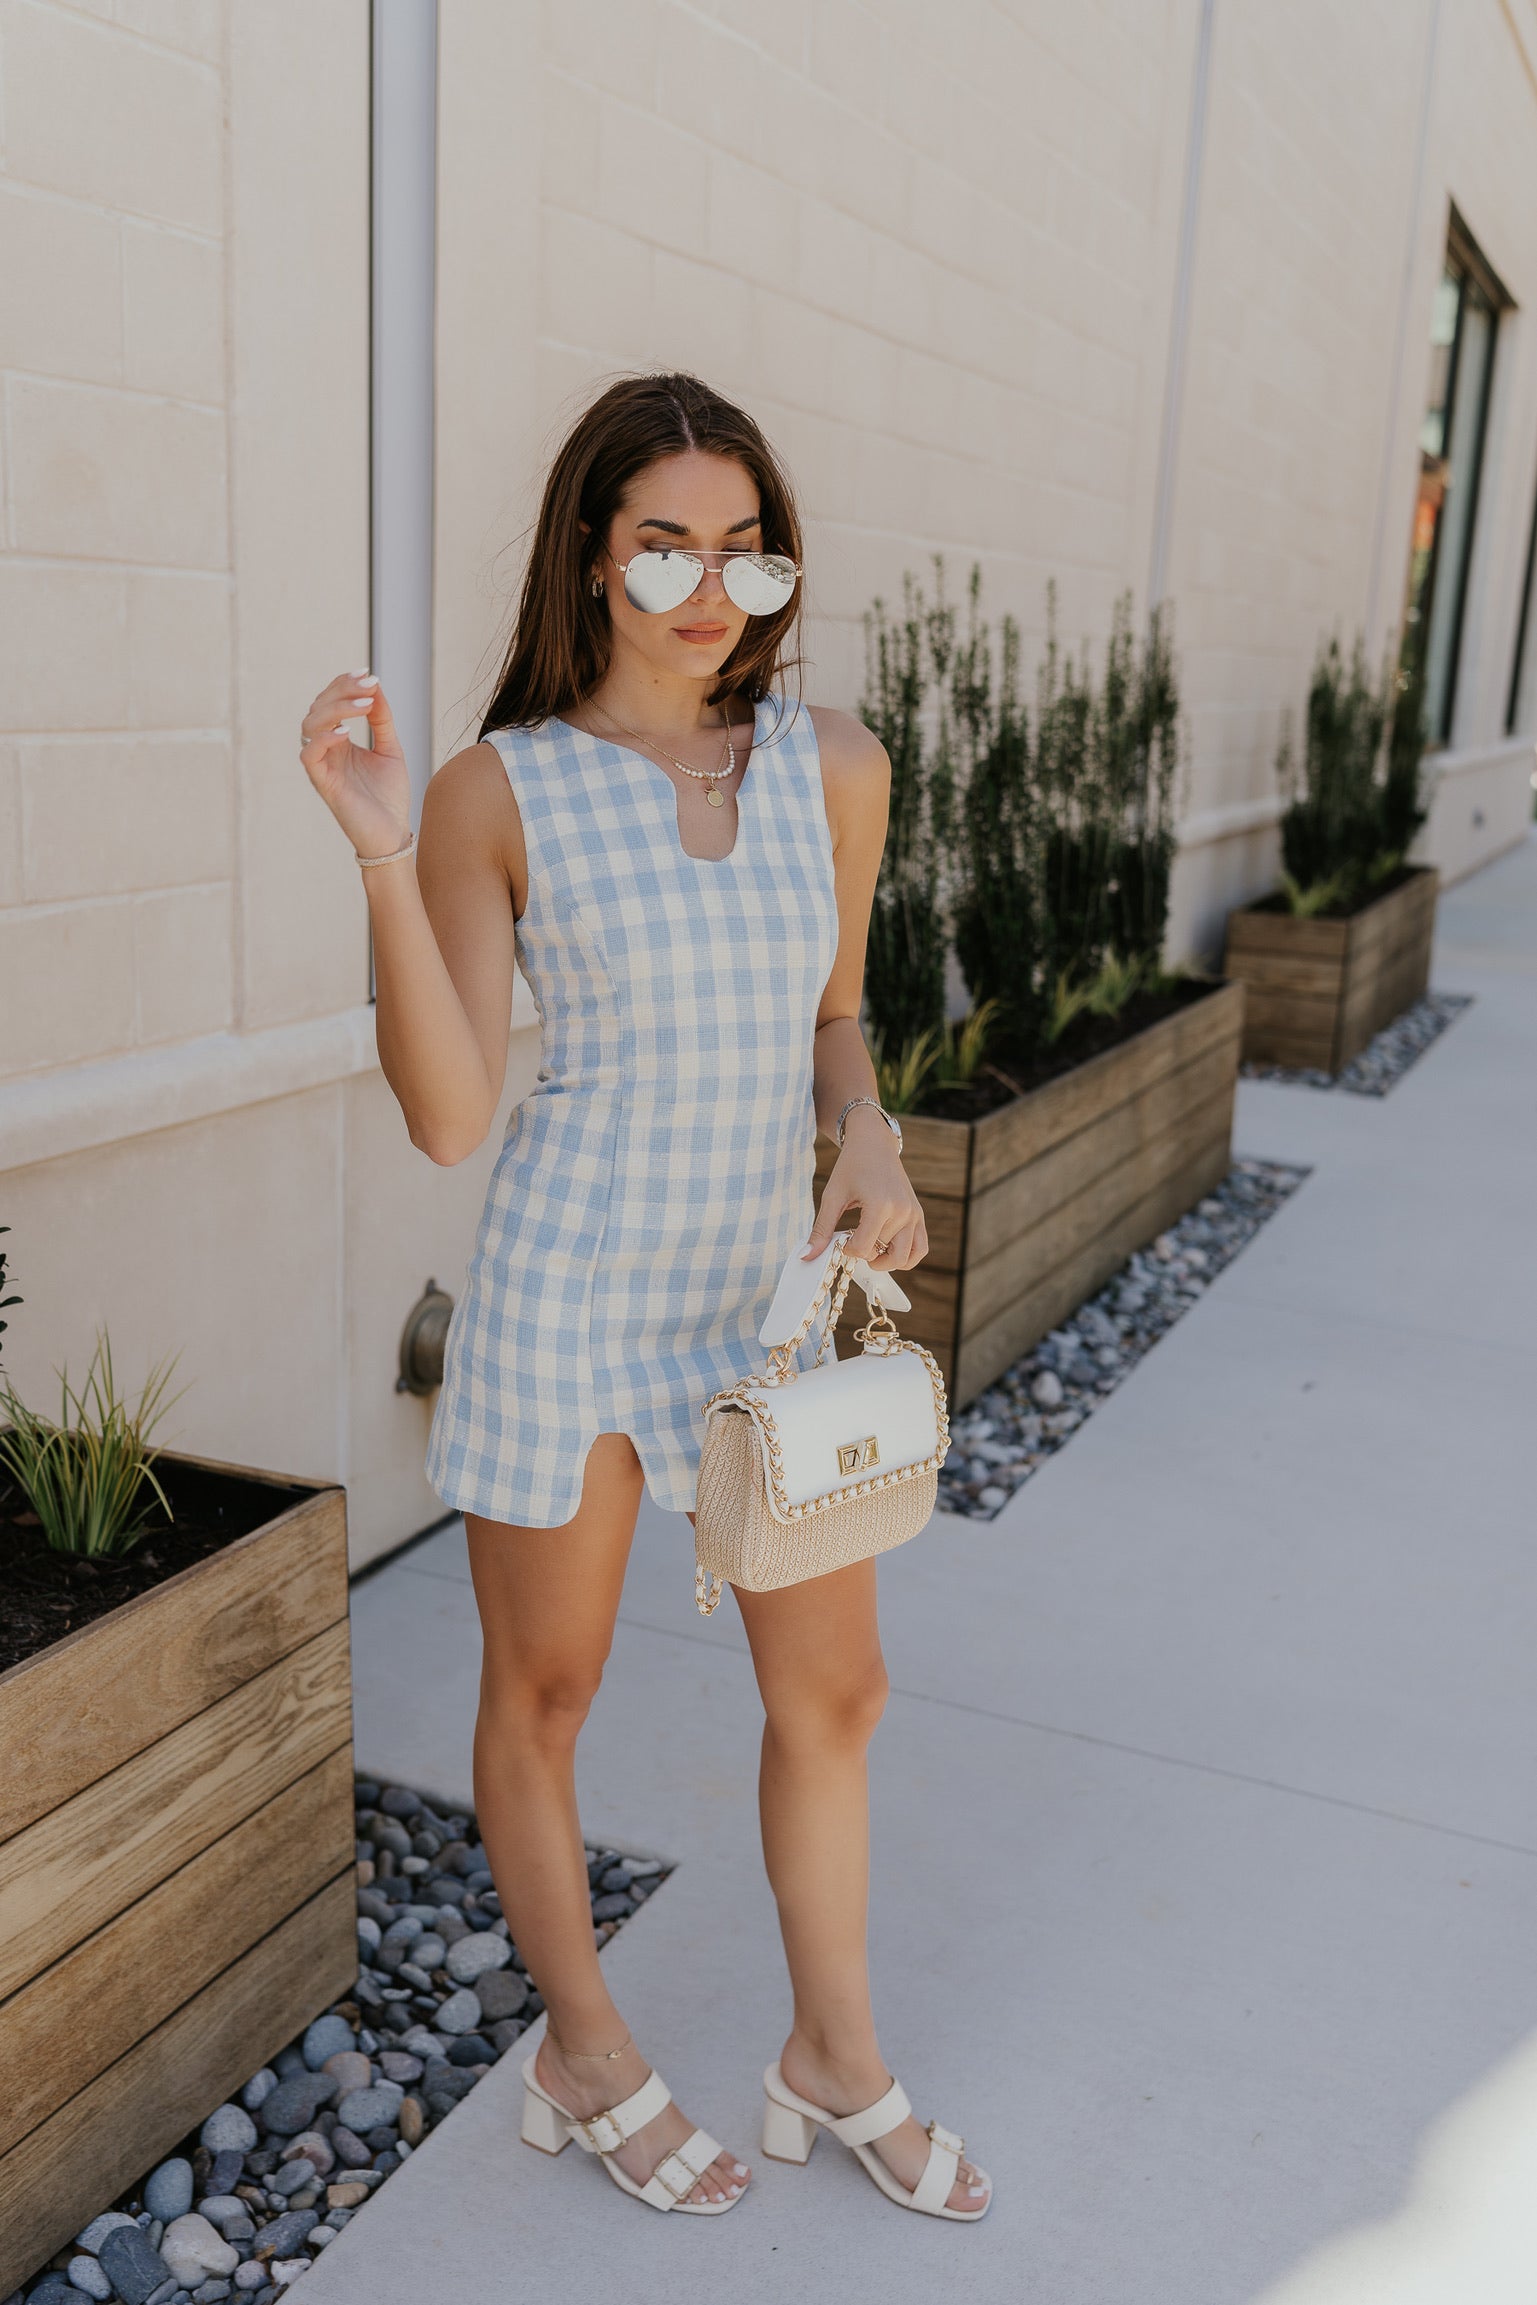 image of model wearing blue and white plaid dress, link on image reads "shop dresses"